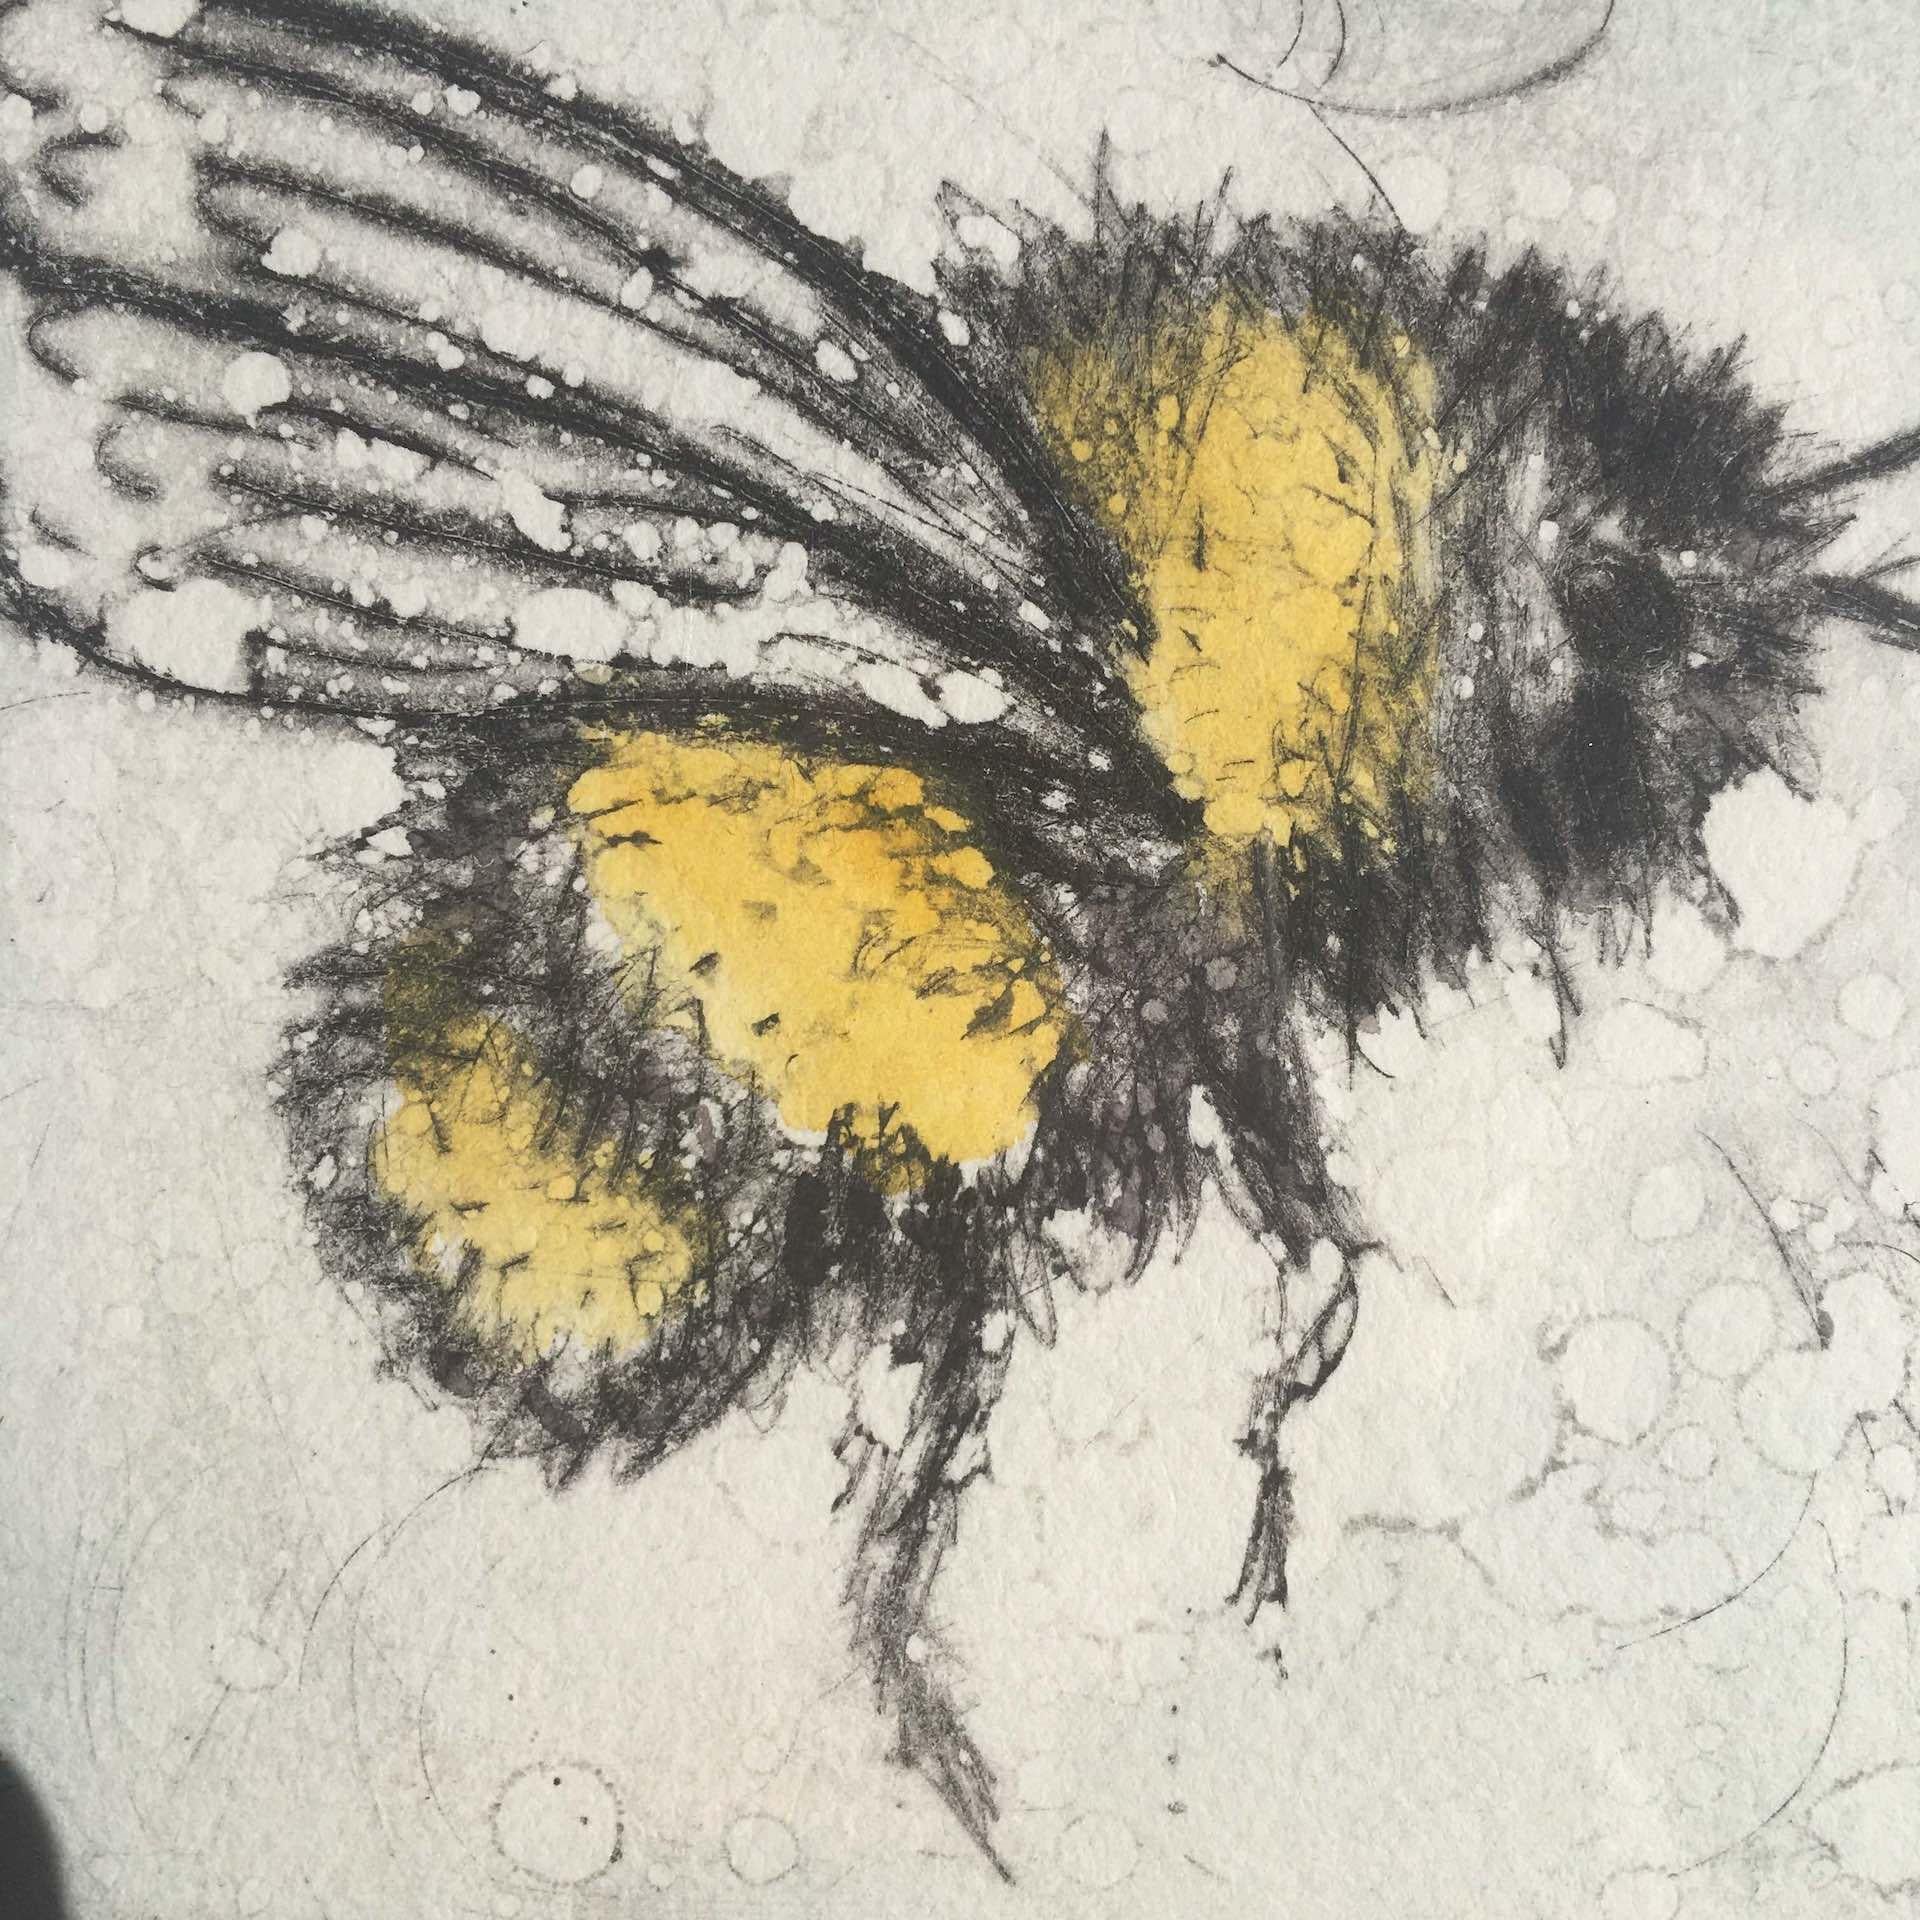 Vicky Oldfield
Buzzing Around
Limited Edition Collagraph Print
Edition of 30
Image Size: H 9.5cm x W 9.5cm
Sheet Size: H 23cm x W 23cm x D 0.1cm
Sold Unframed
Please note that insitu images are purely an indication of how a piece may look

Buzzing